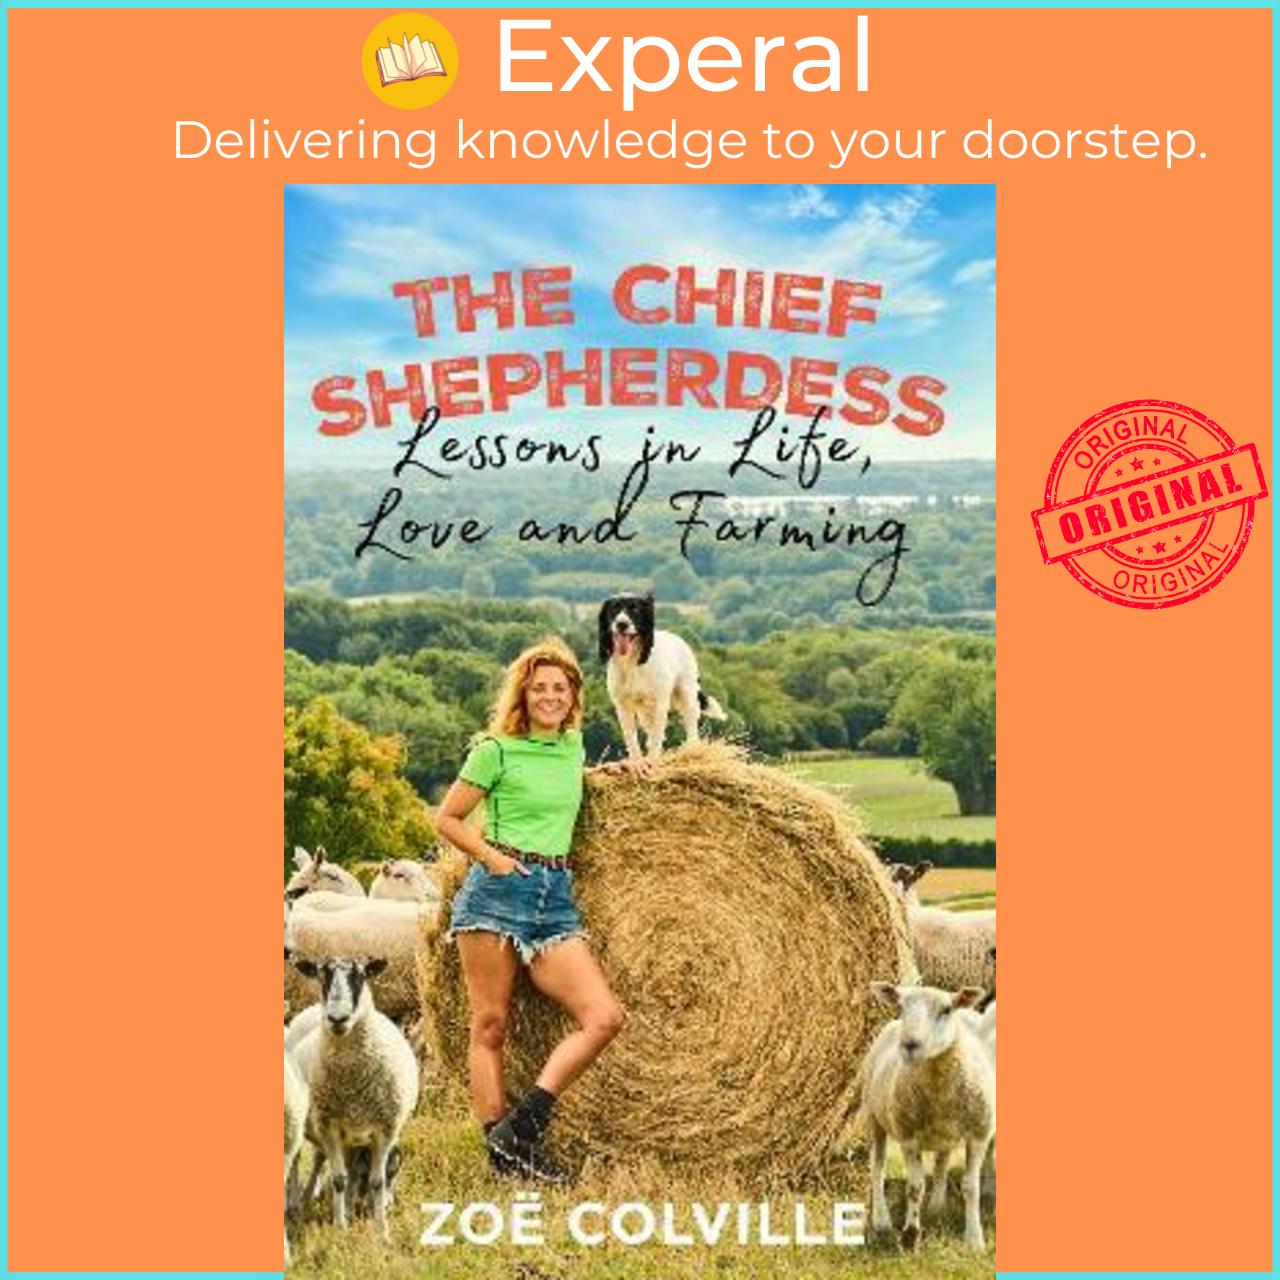 Sách - The Chief Shepherdess : Lessons in Life, Love and Farming by Zoe Colville (UK edition, hardcover)